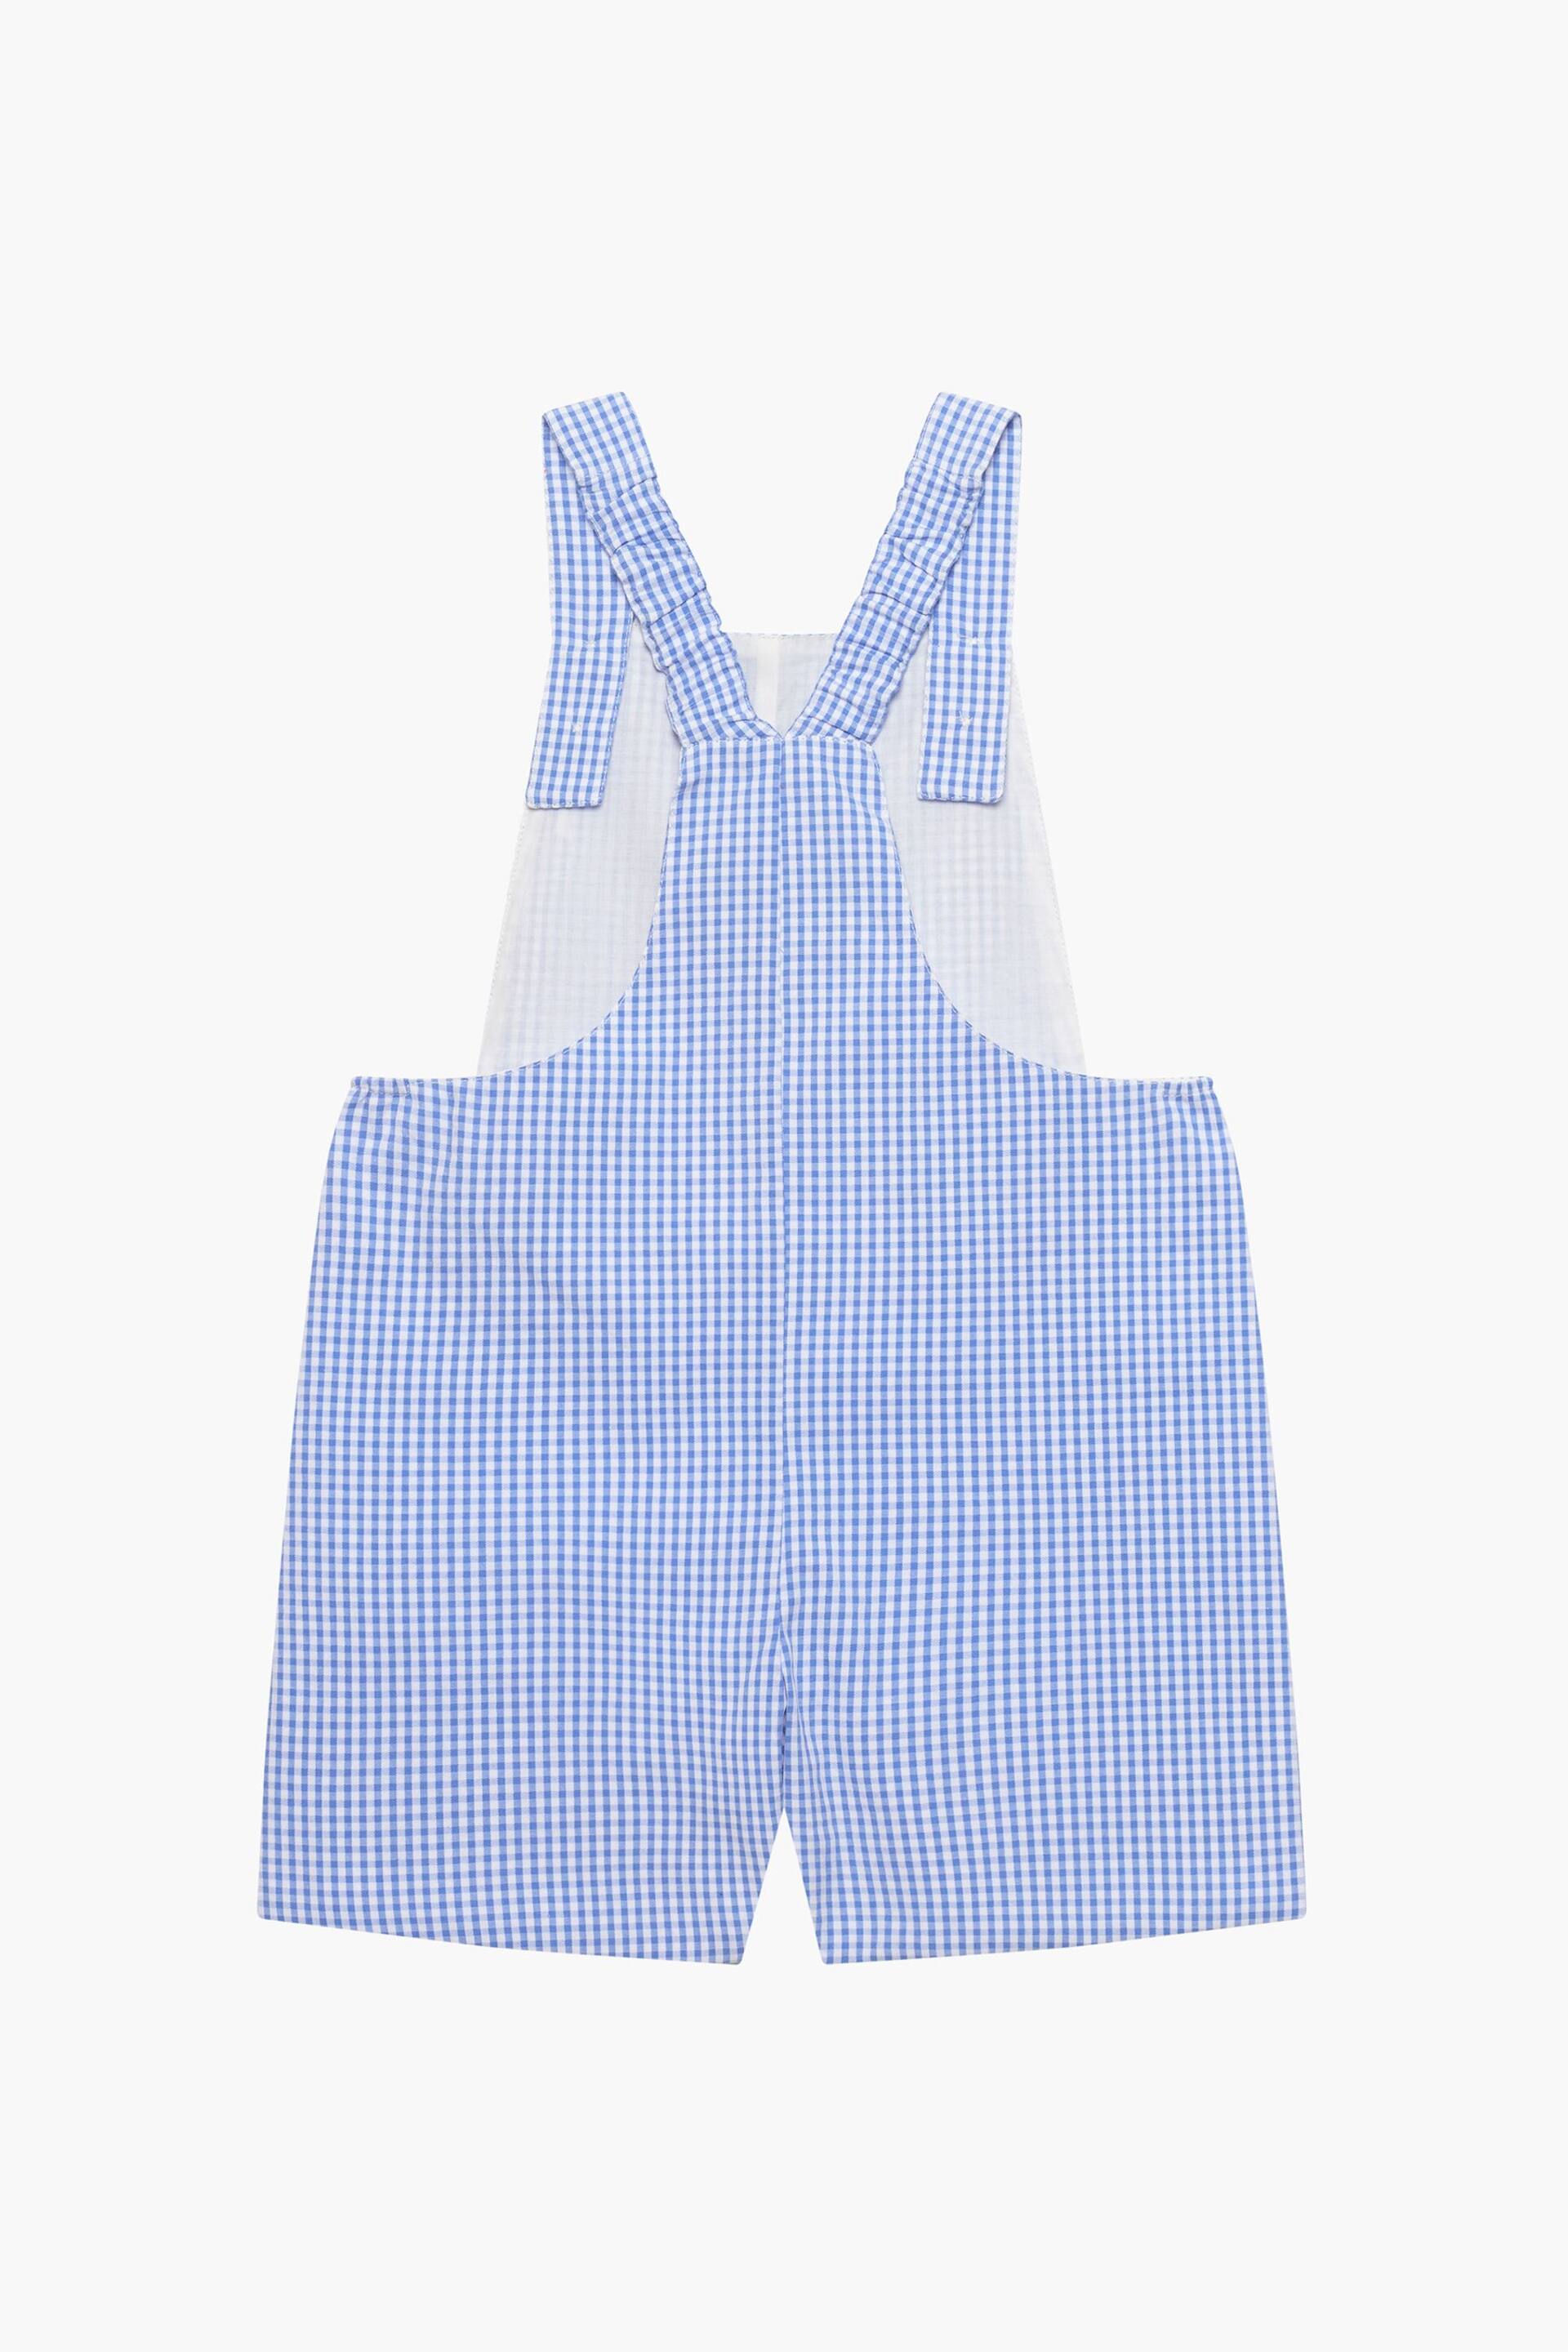 Trotters London Little Pale Gingham Augustus and Friends Alexander Bib Dungress - Image 3 of 4